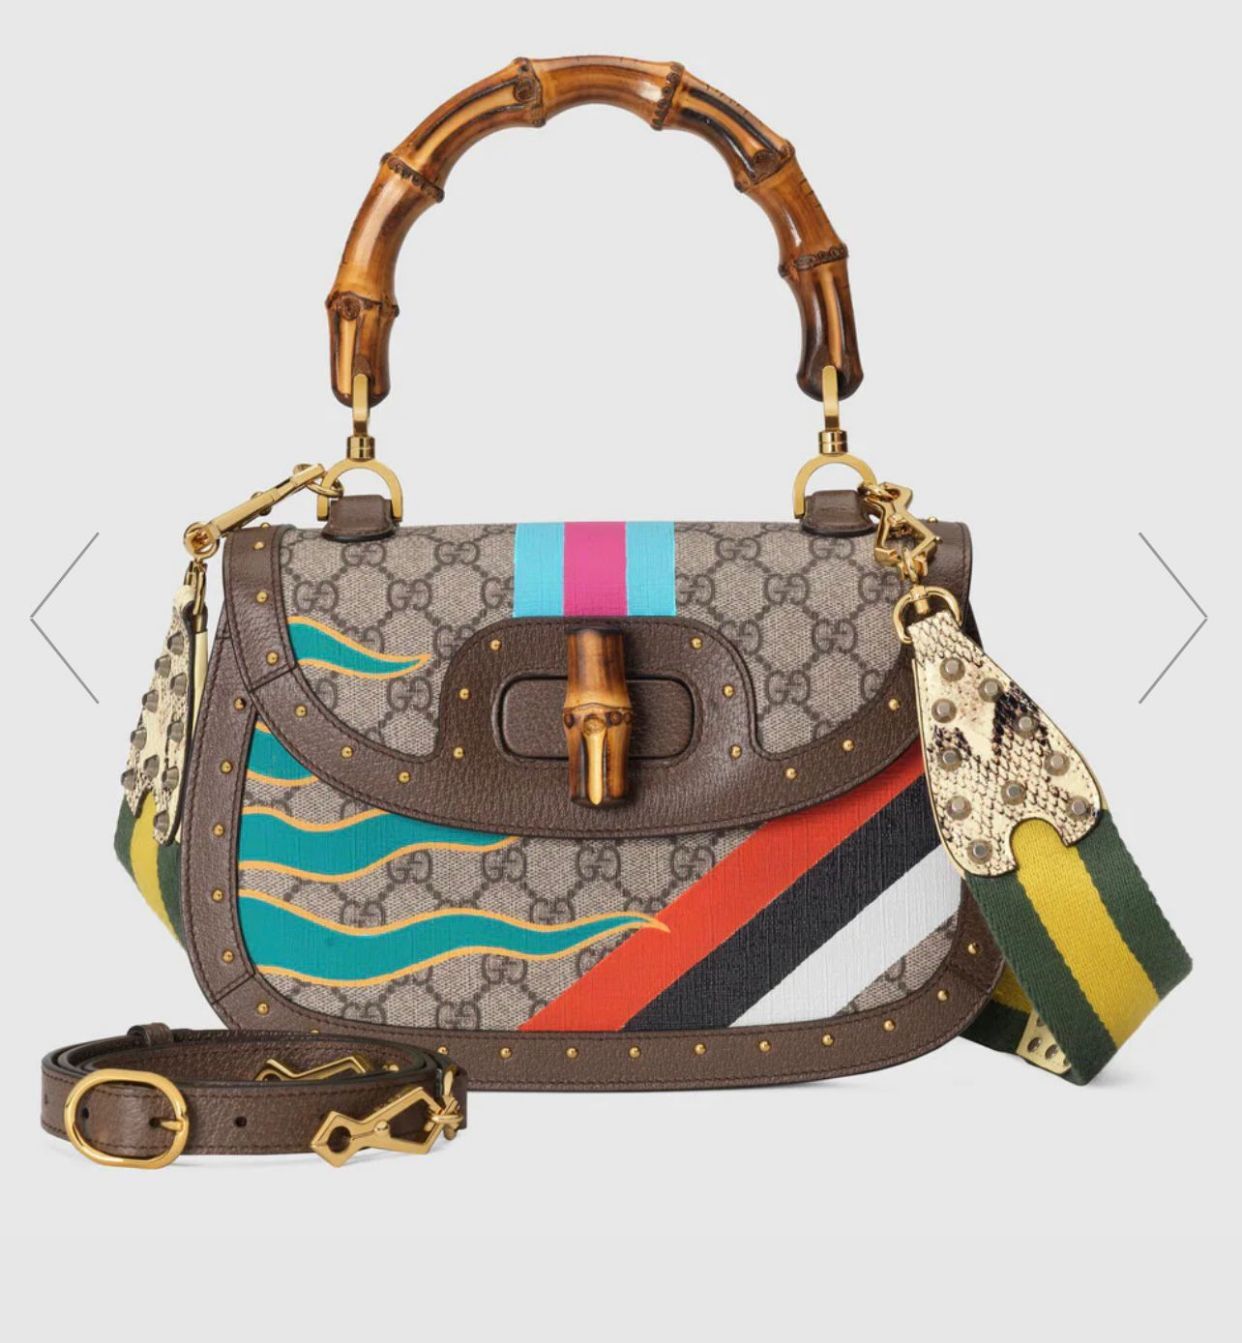 Gucci top handle bag with Bamboo 675798 colorful pattern